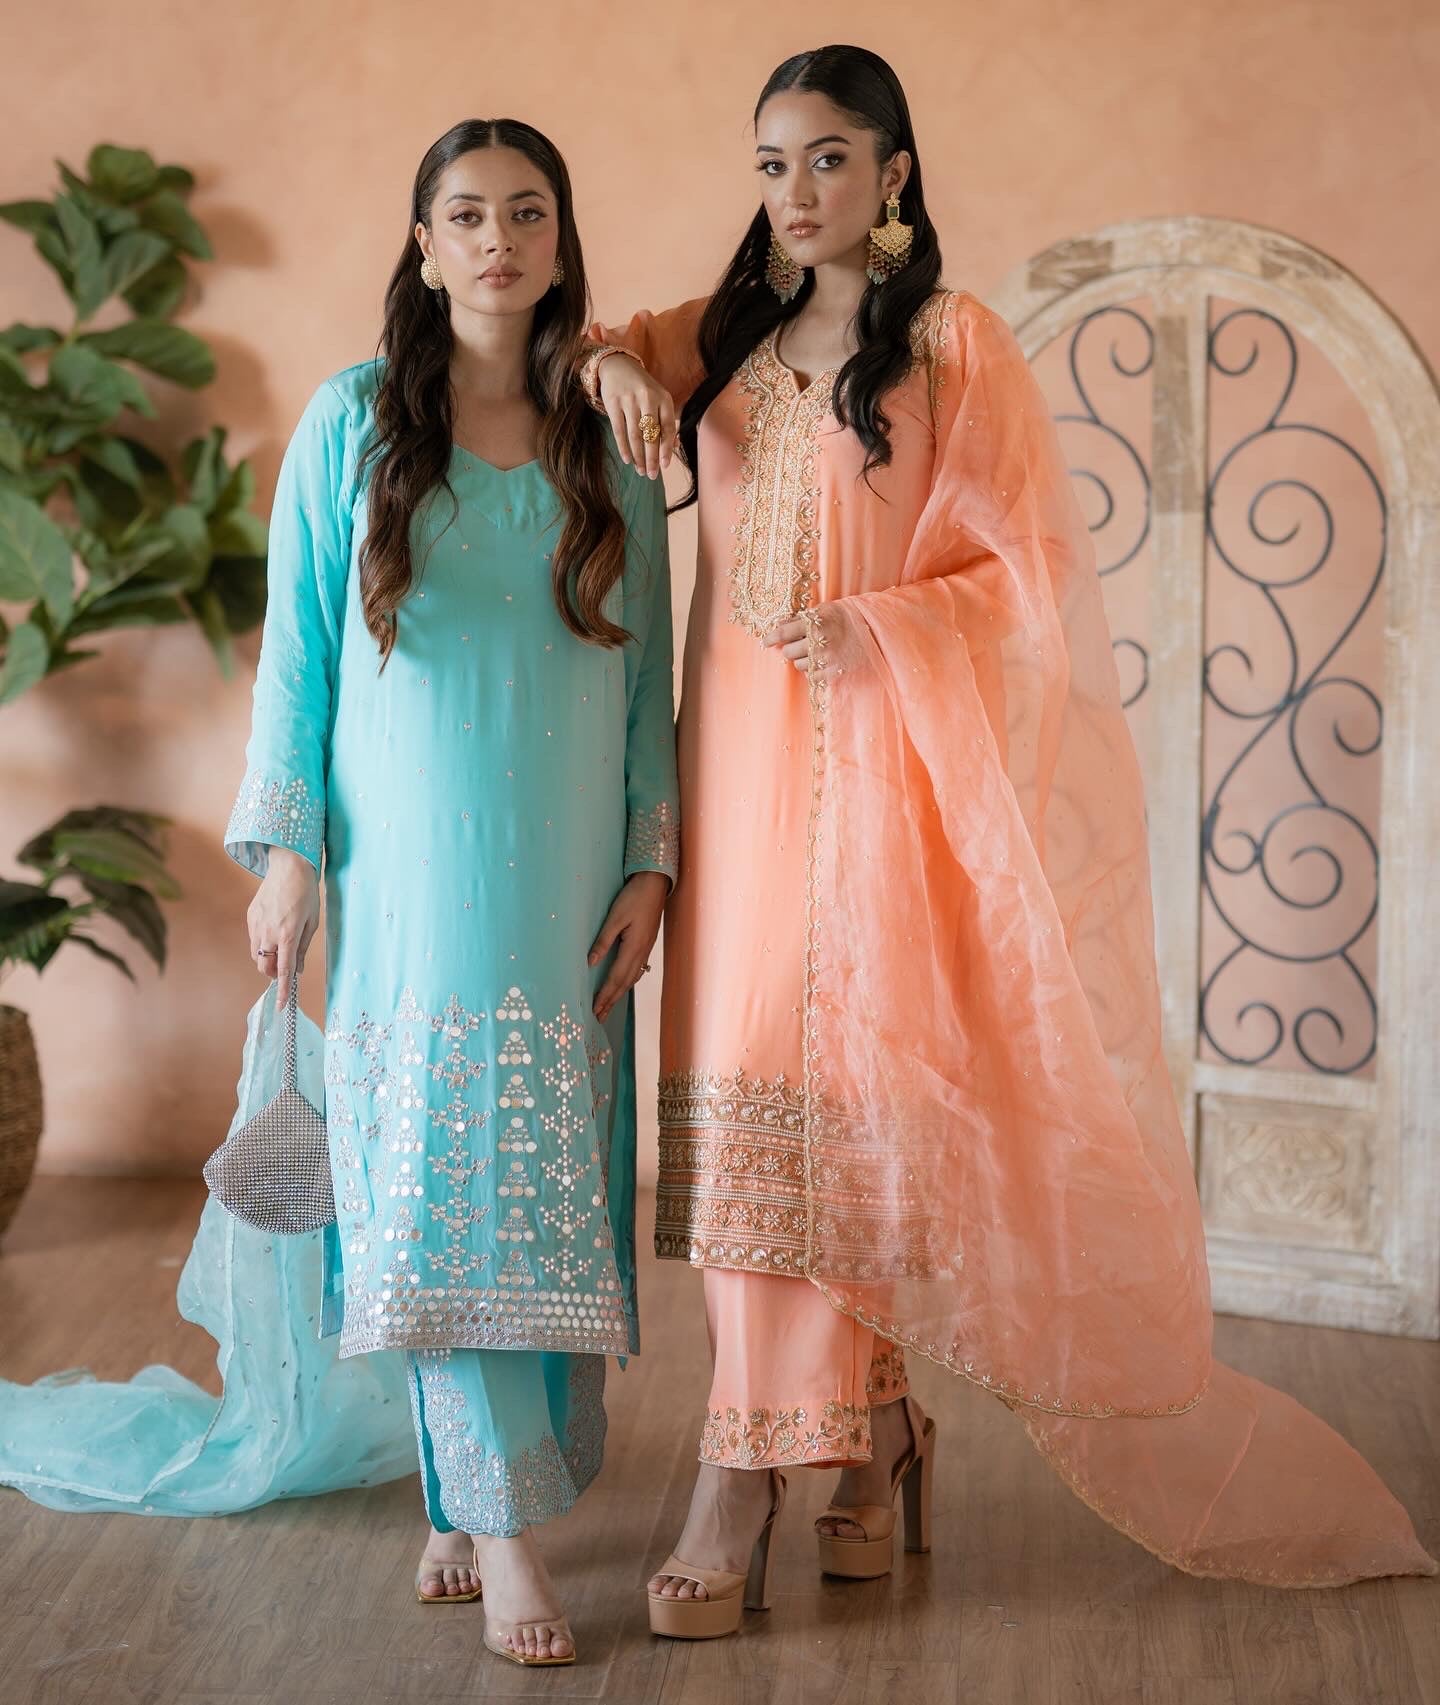 Welcome to Gurnazz Couture, where timeless elegance meets cultural richness! We take pride in being a premier destination for exquisite Pakistani and Indian clothing collections, curated with a passion for fashion and a deep appreciation for the rich heritage of both cultures.